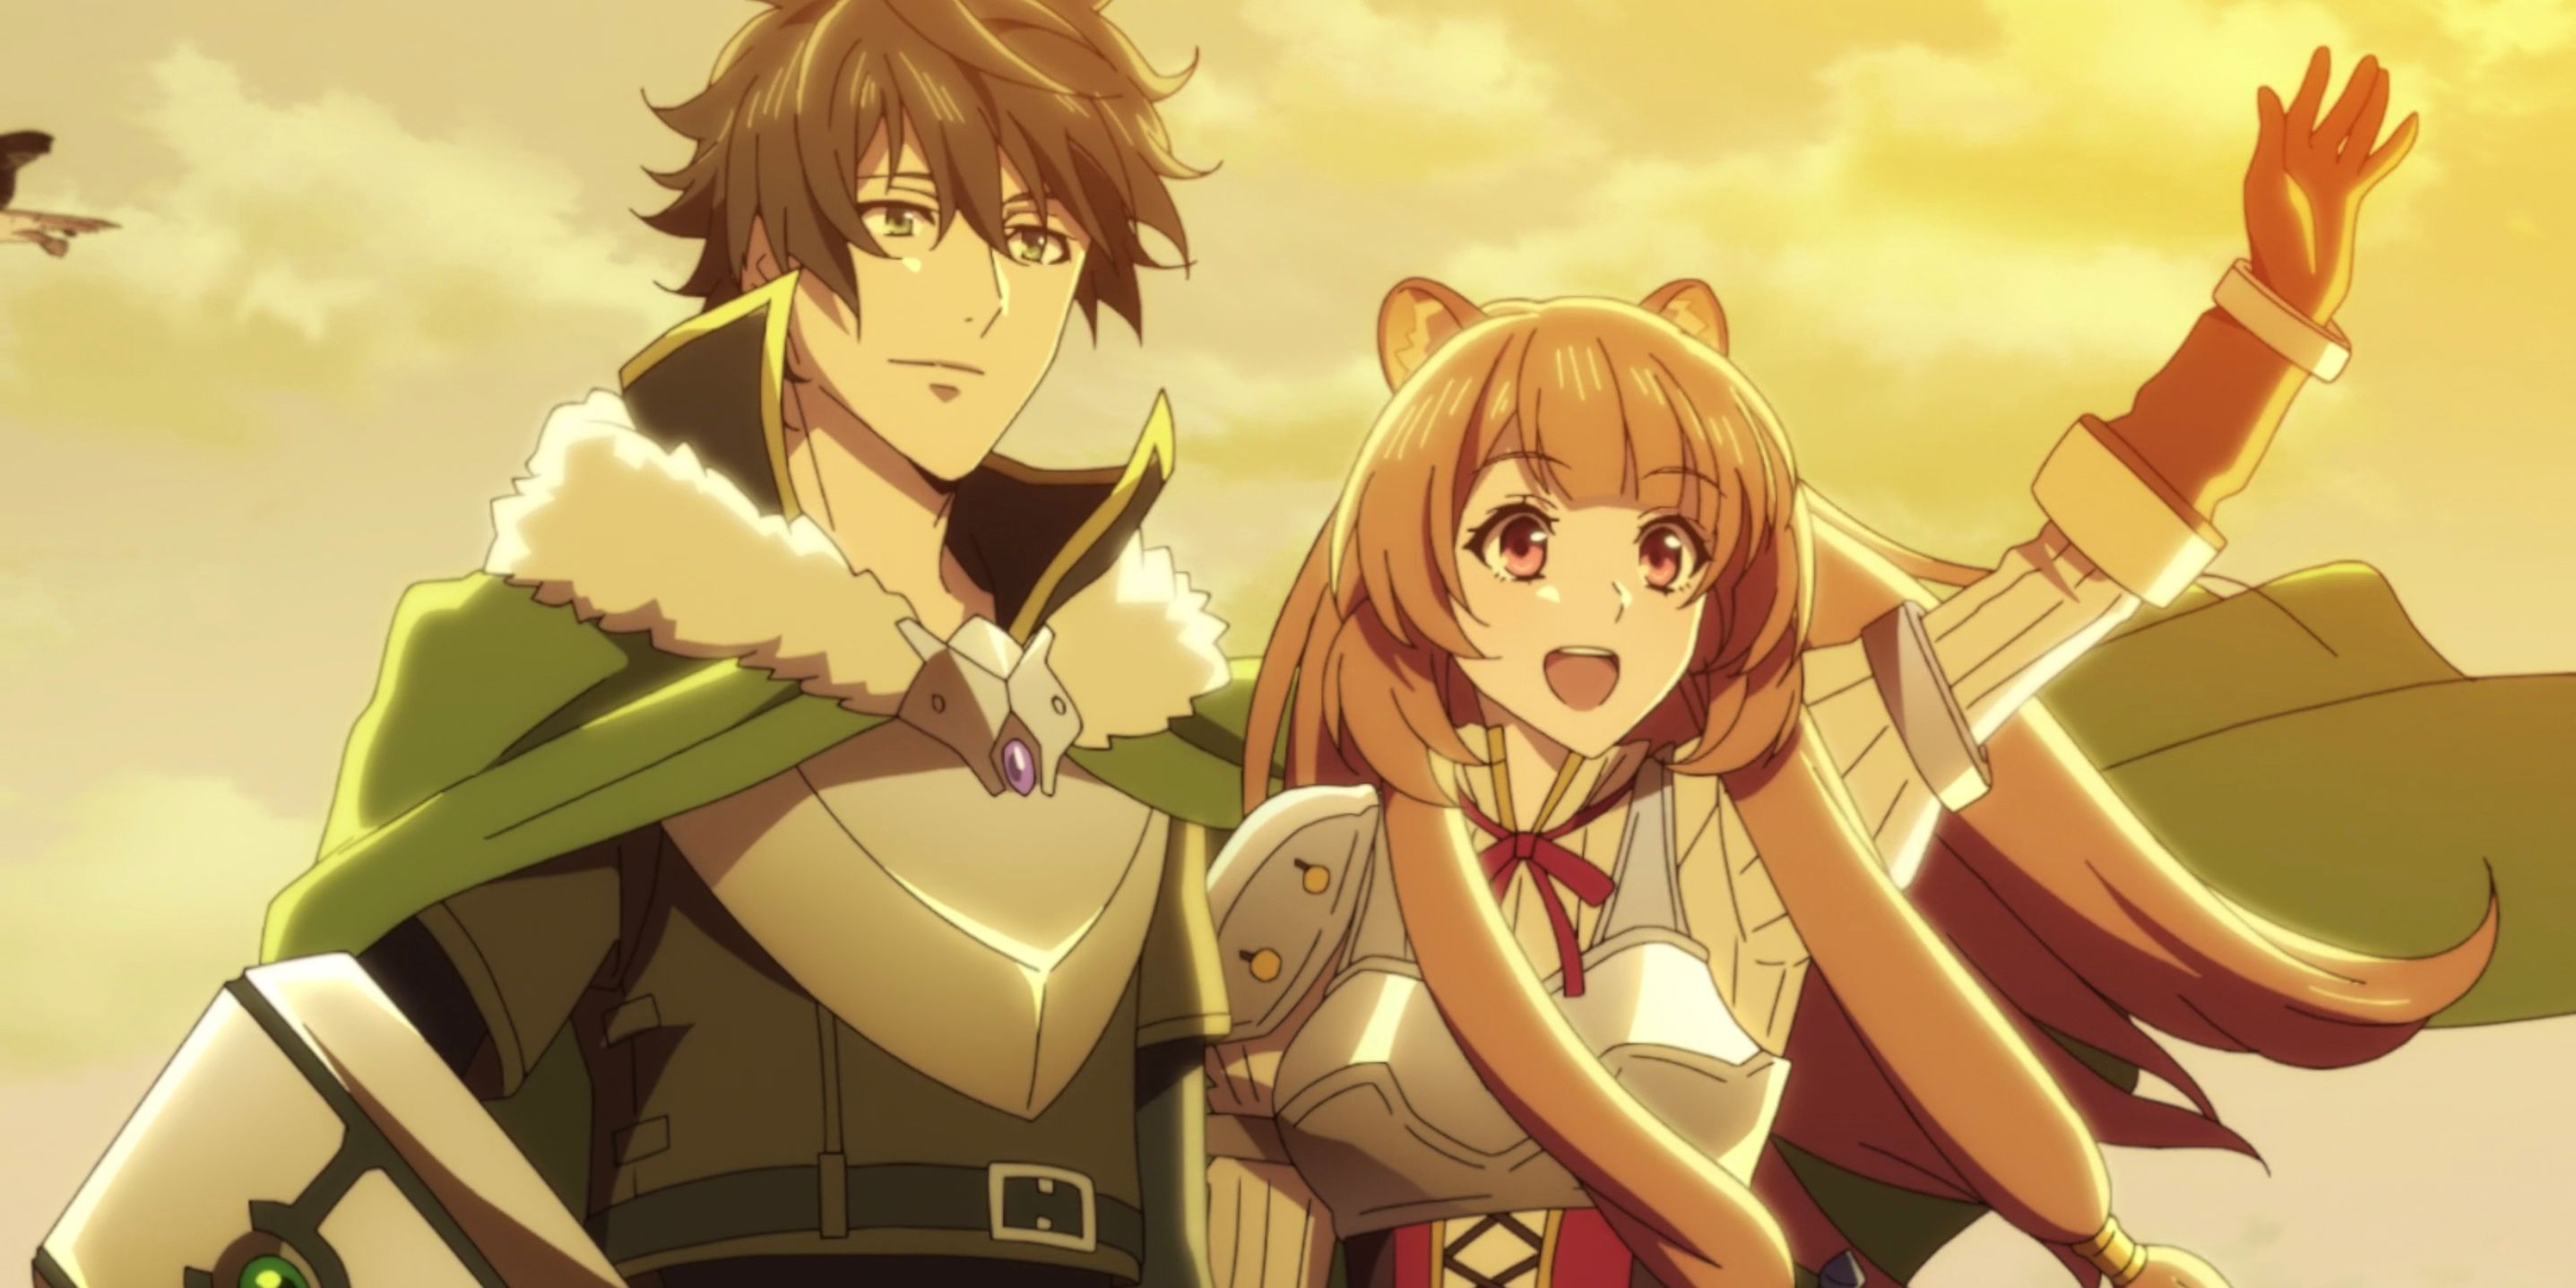 Crunchyroll Reveals The Rising of the Shield Hero 2 Anime's English Dub Cast,  May 4 Premiere - News - Anime News Network